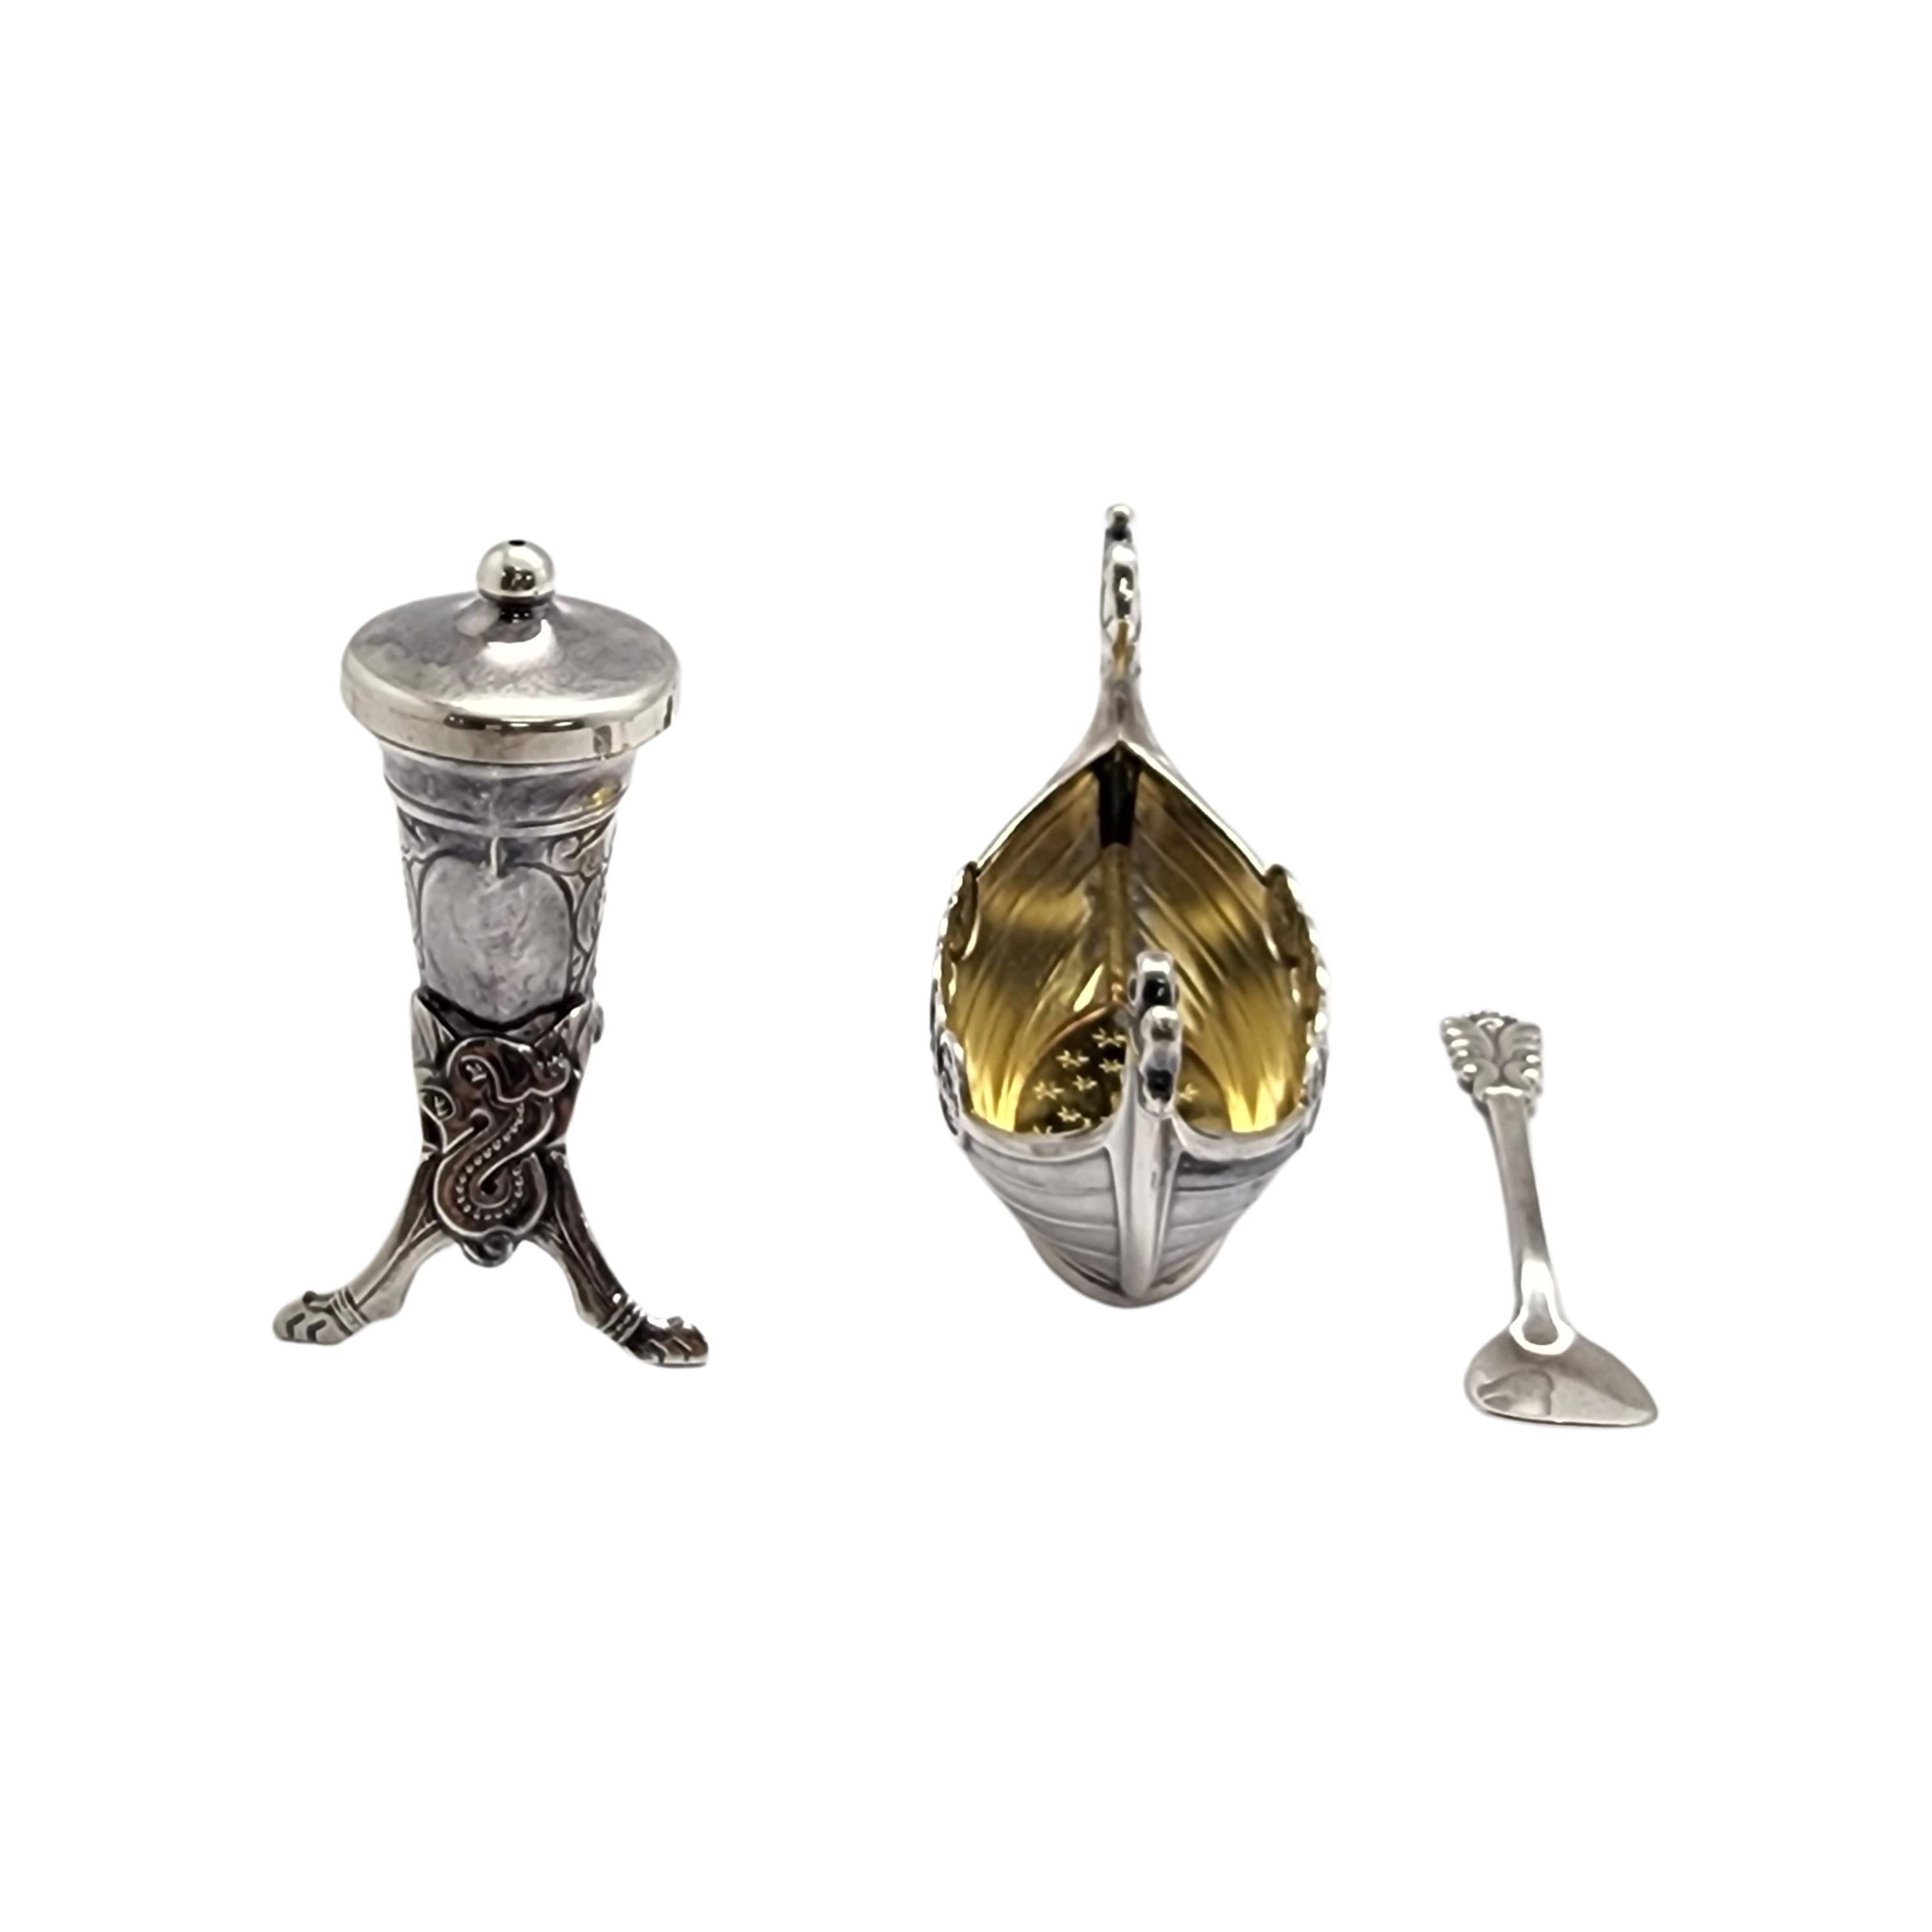 Sterling silver Viking ship salt cellar with spoon and Viking horn pepper shaker by Theodor Olsens of Norway.

Ornate Viking horn pepper shaker featuring one small hole at the center of the removable lid. Beautiful Viking ship salt cellar featuring